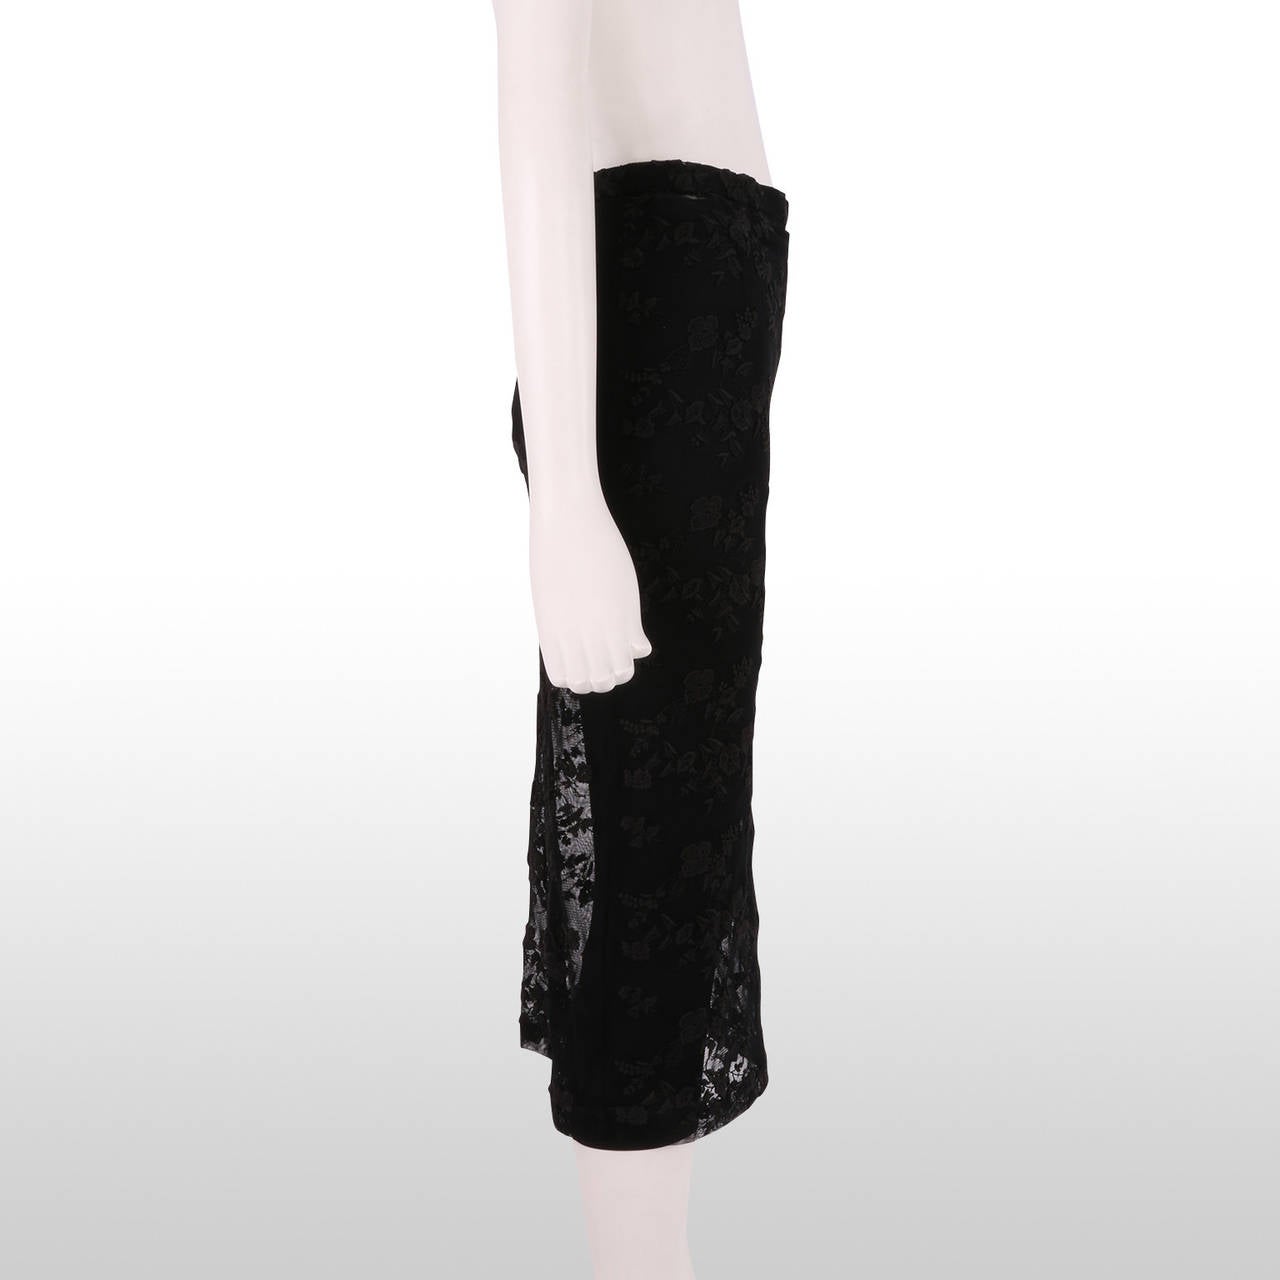 Dolce & Gabbana Black Pedal Pusher Leggings with Lace Skirt Overlay In Excellent Condition For Sale In London, GB